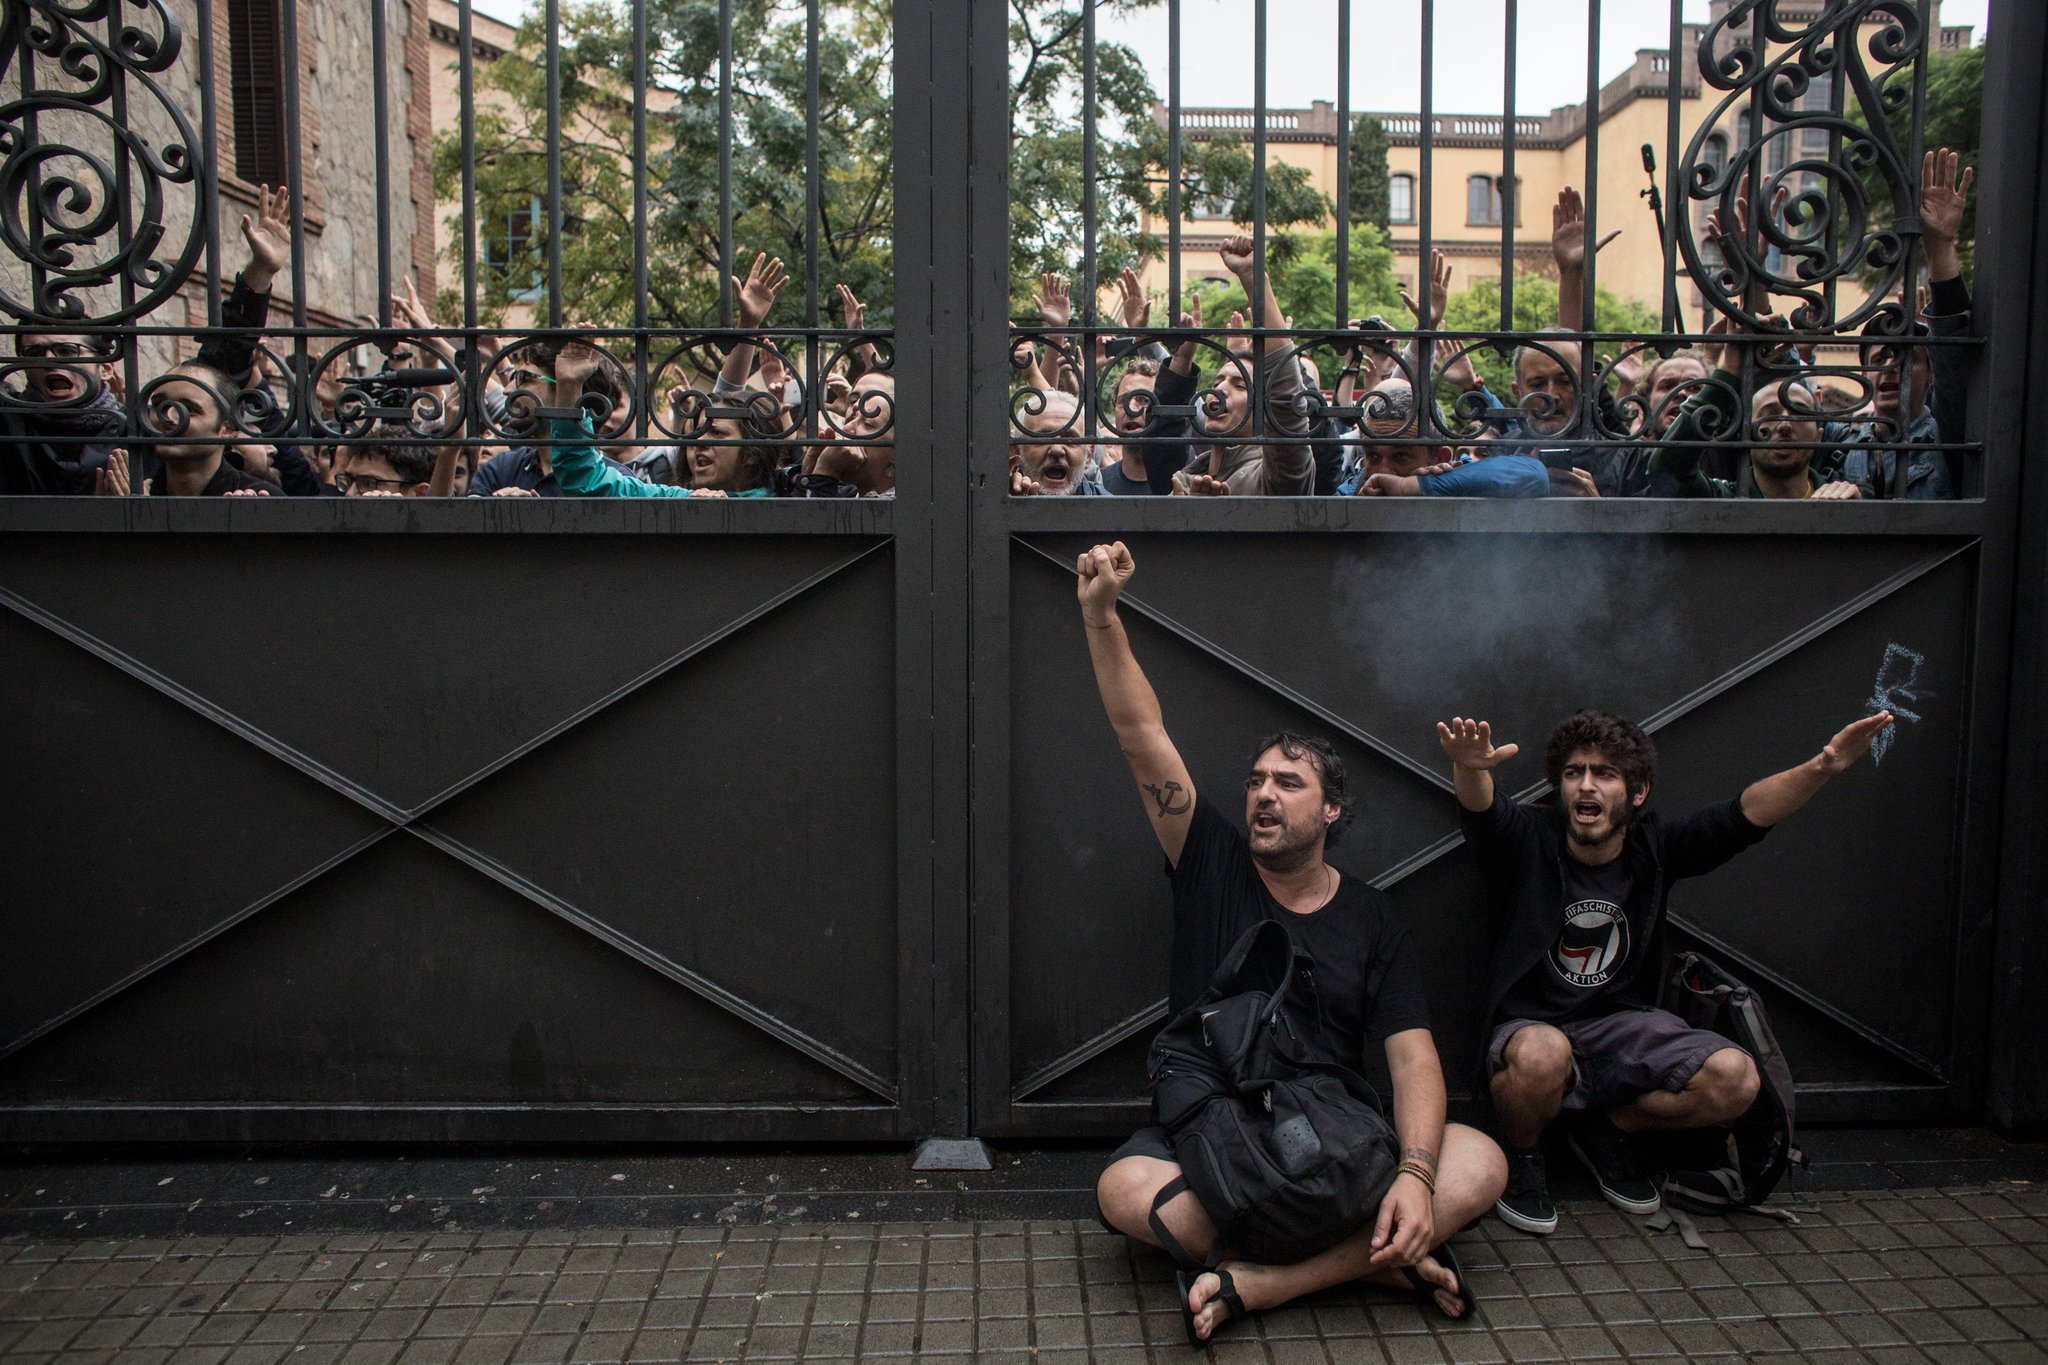 Pro-referendum supporters blocked a gate to a polling station in Barcelona as members of the Spanish police arrived to control the area. Credit Chris Mcgrath/Getty Images